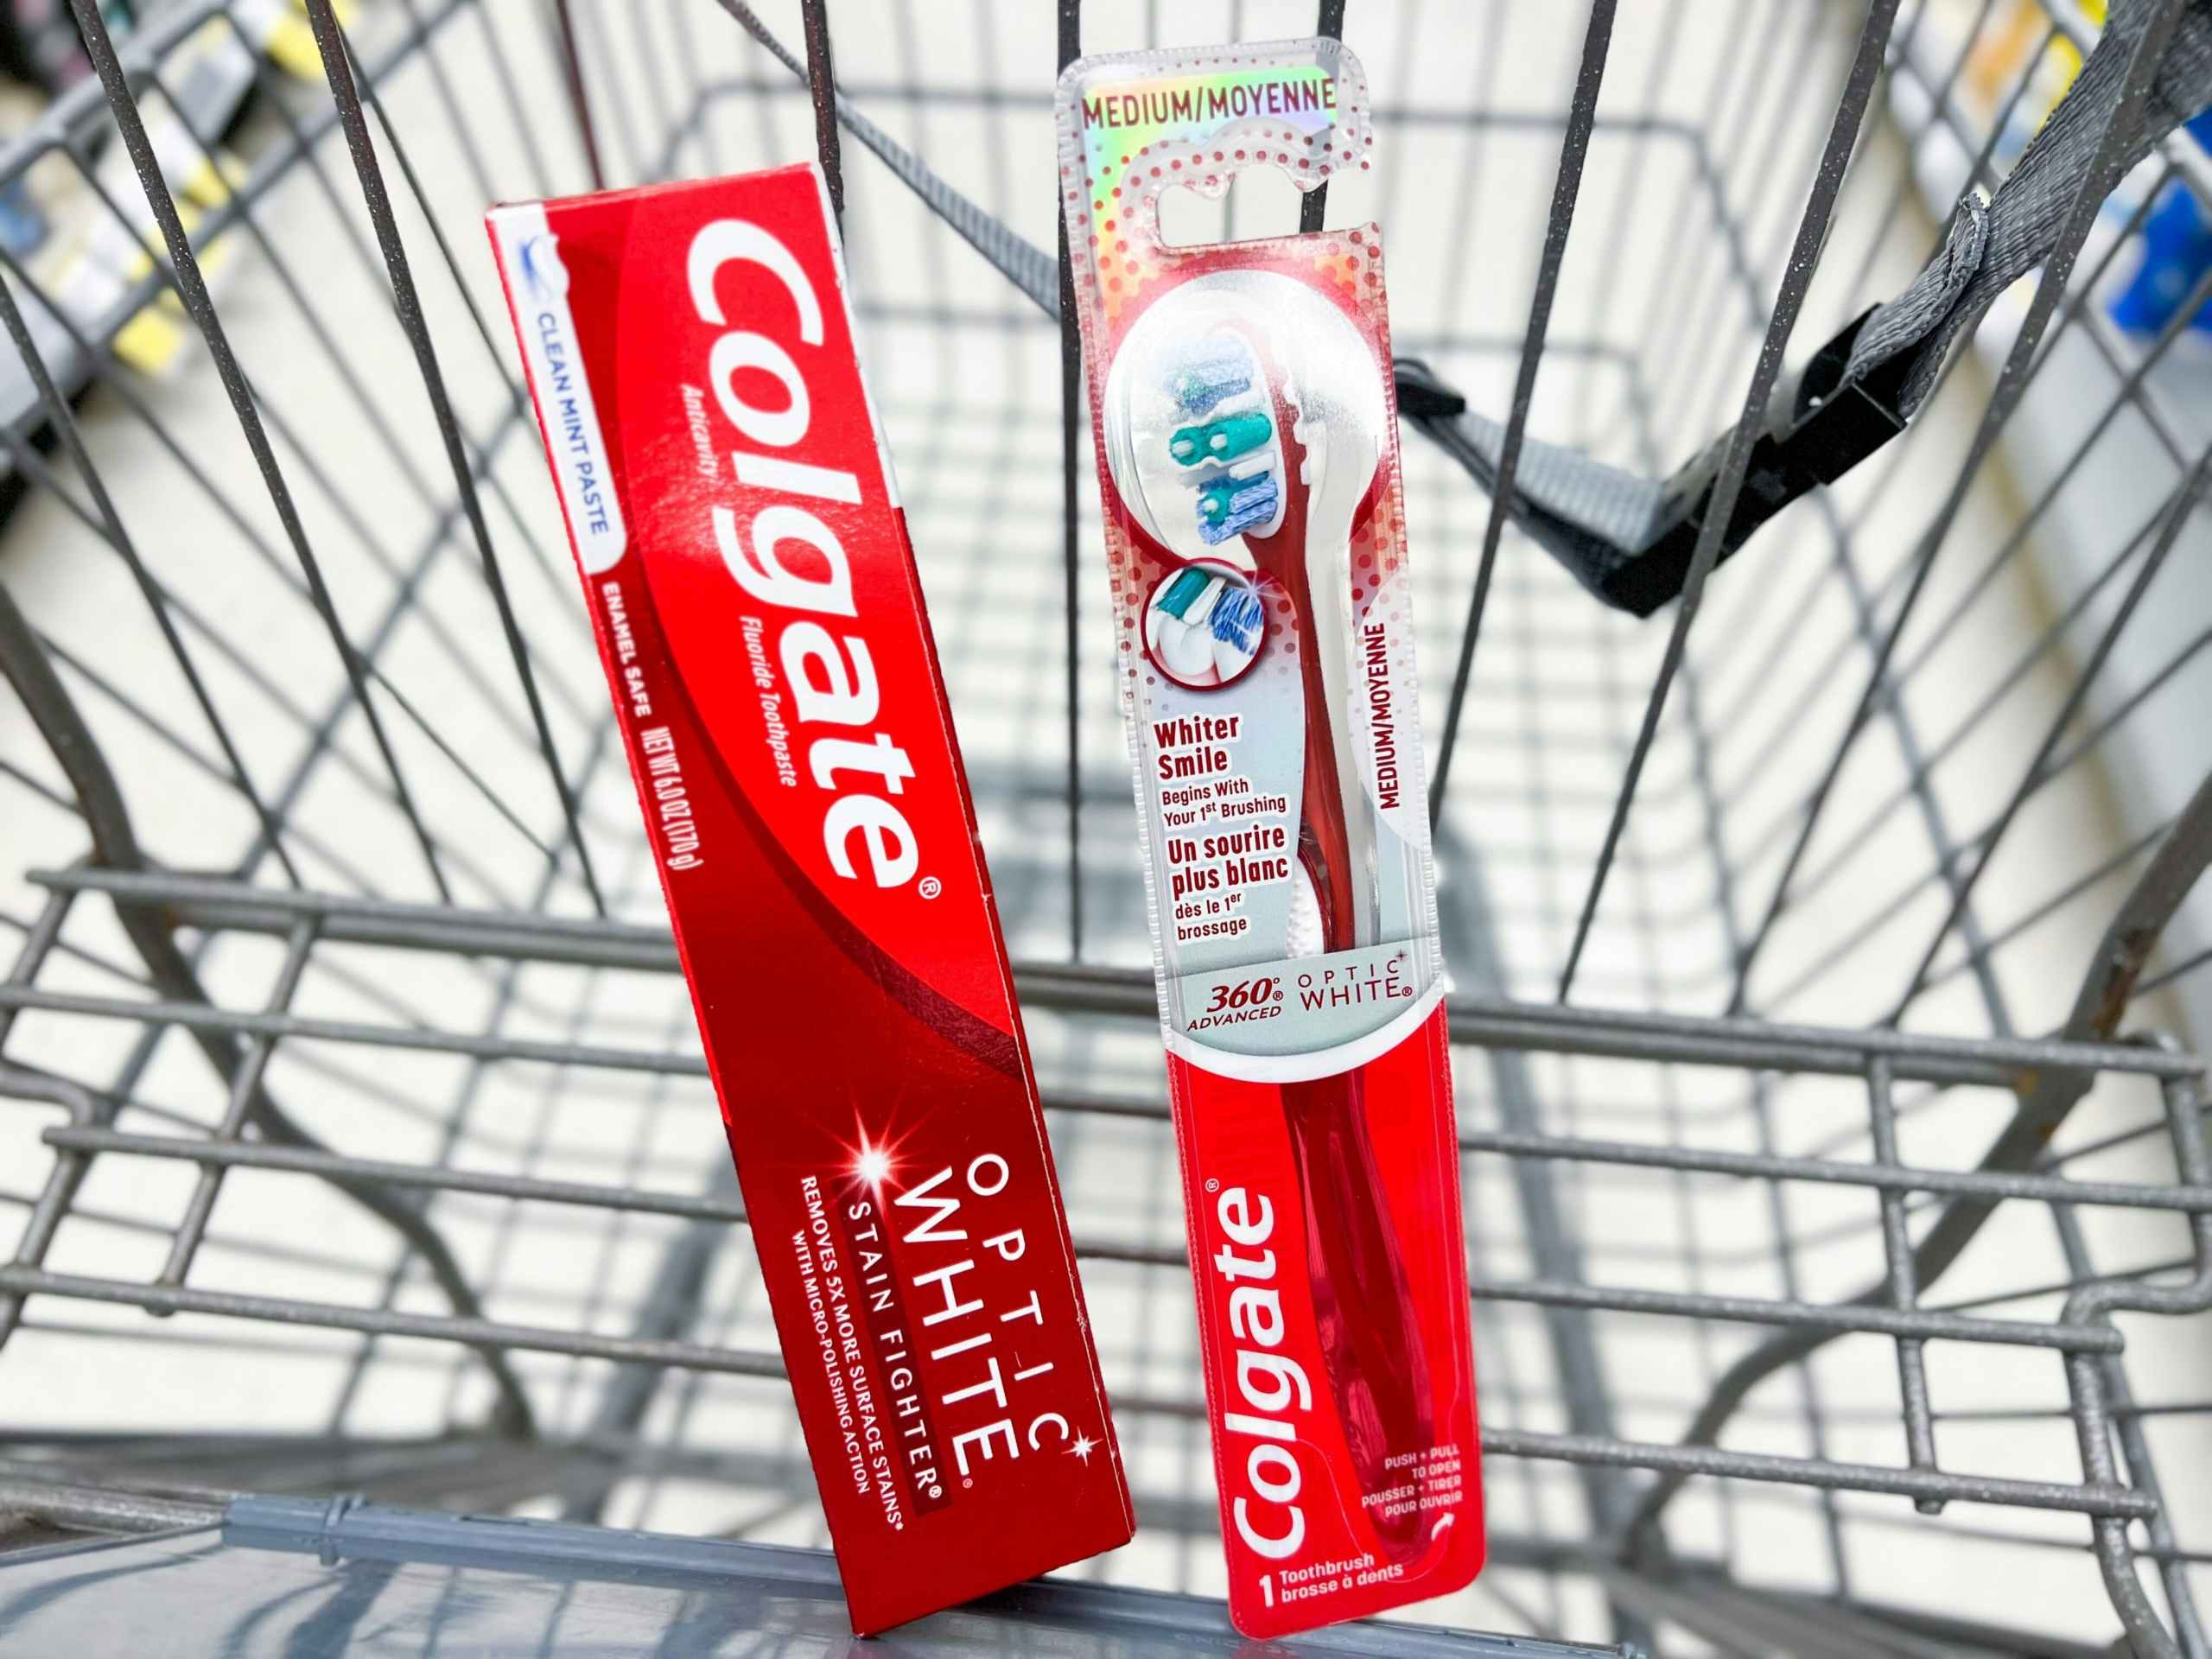 colgate toothbrush & toothpaate in shopping cart